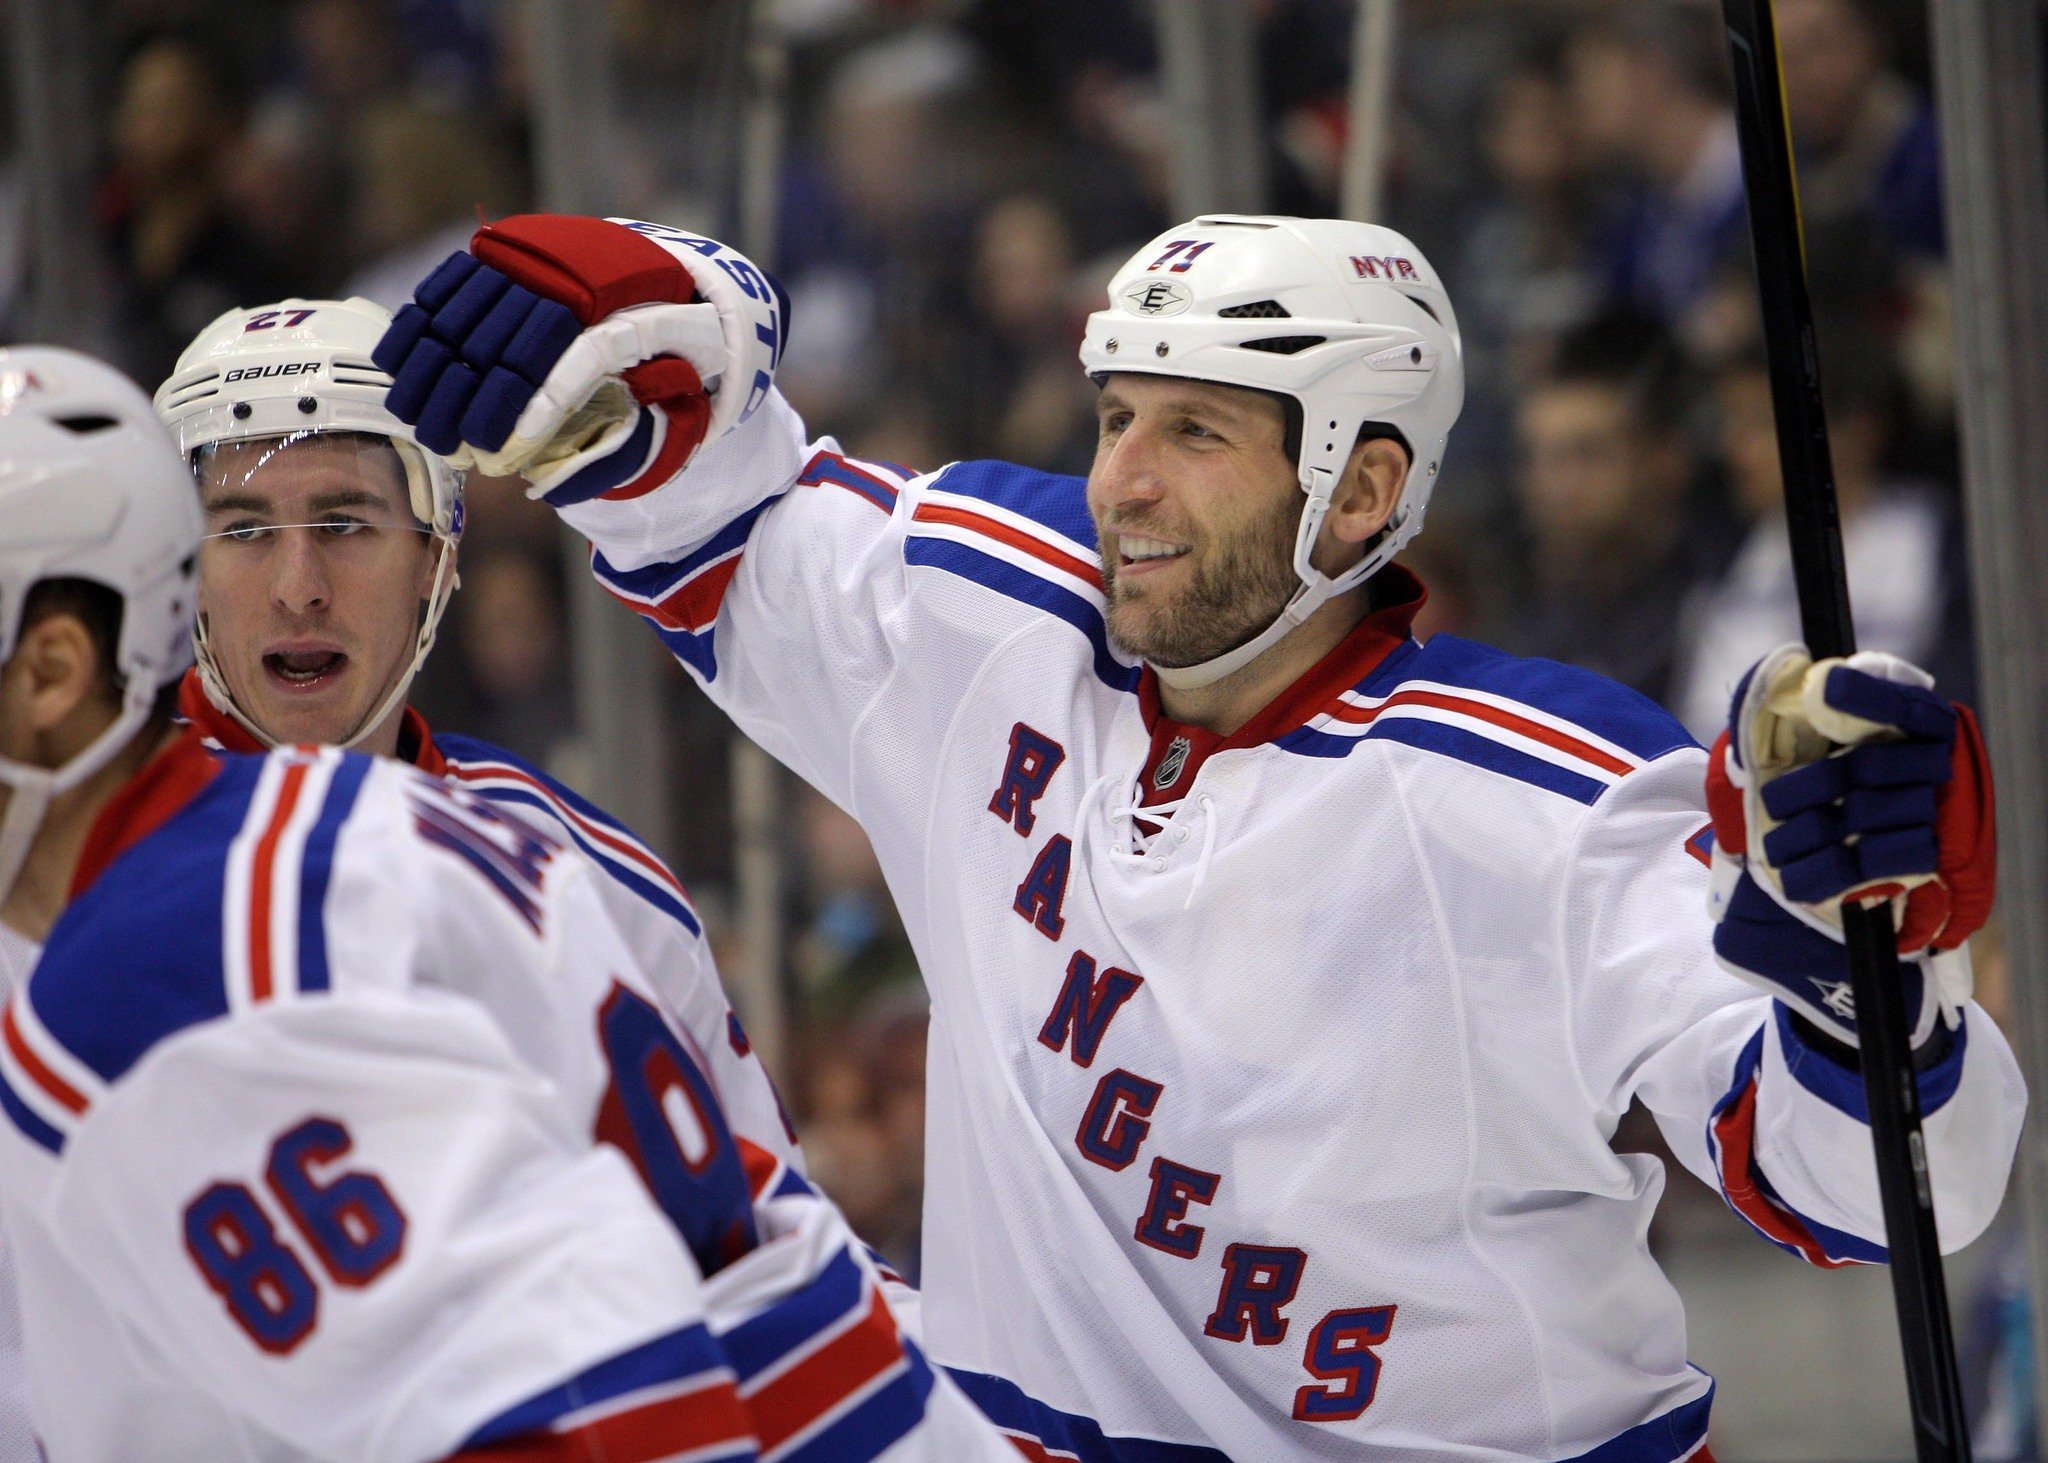 A depth forward could be on the radar for the Rangers.